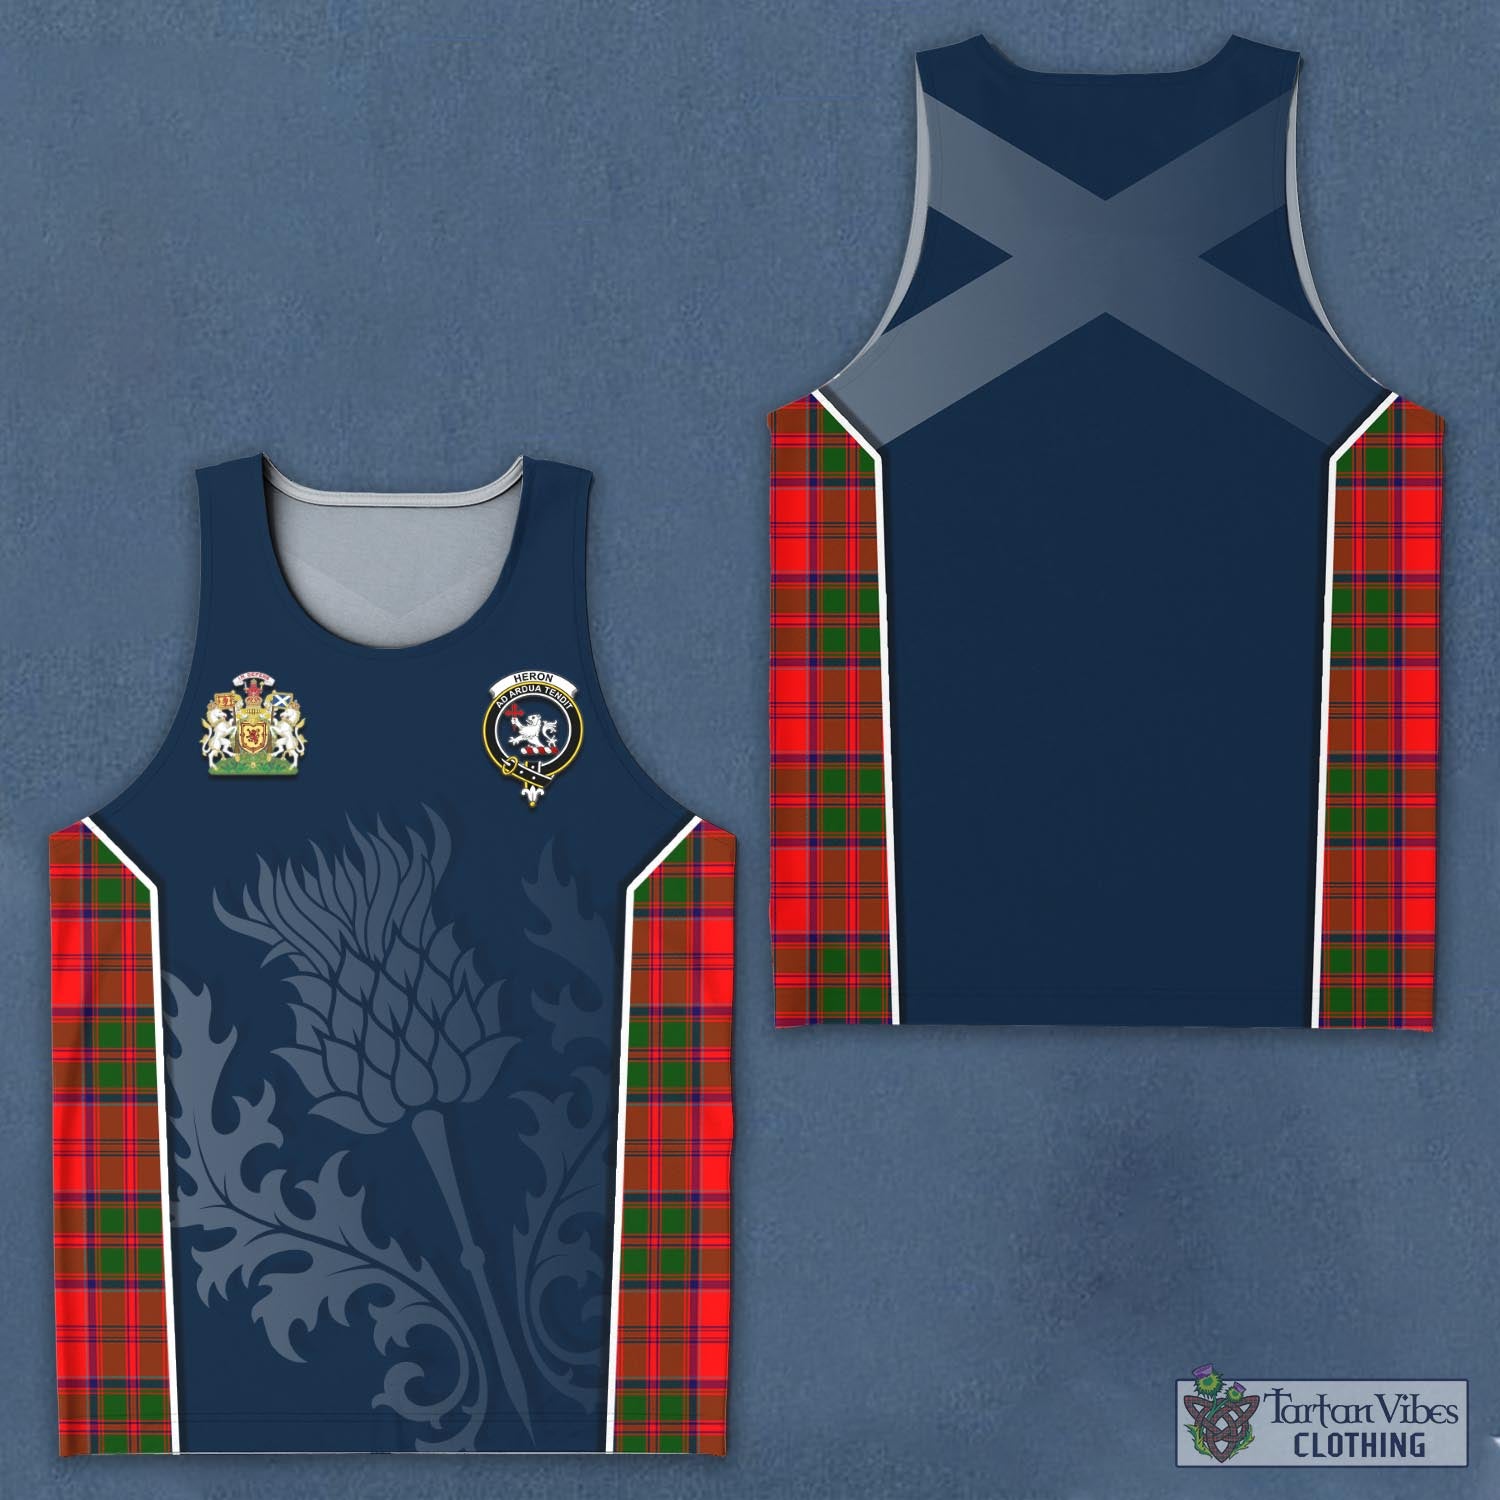 Tartan Vibes Clothing Heron Tartan Men's Tanks Top with Family Crest and Scottish Thistle Vibes Sport Style